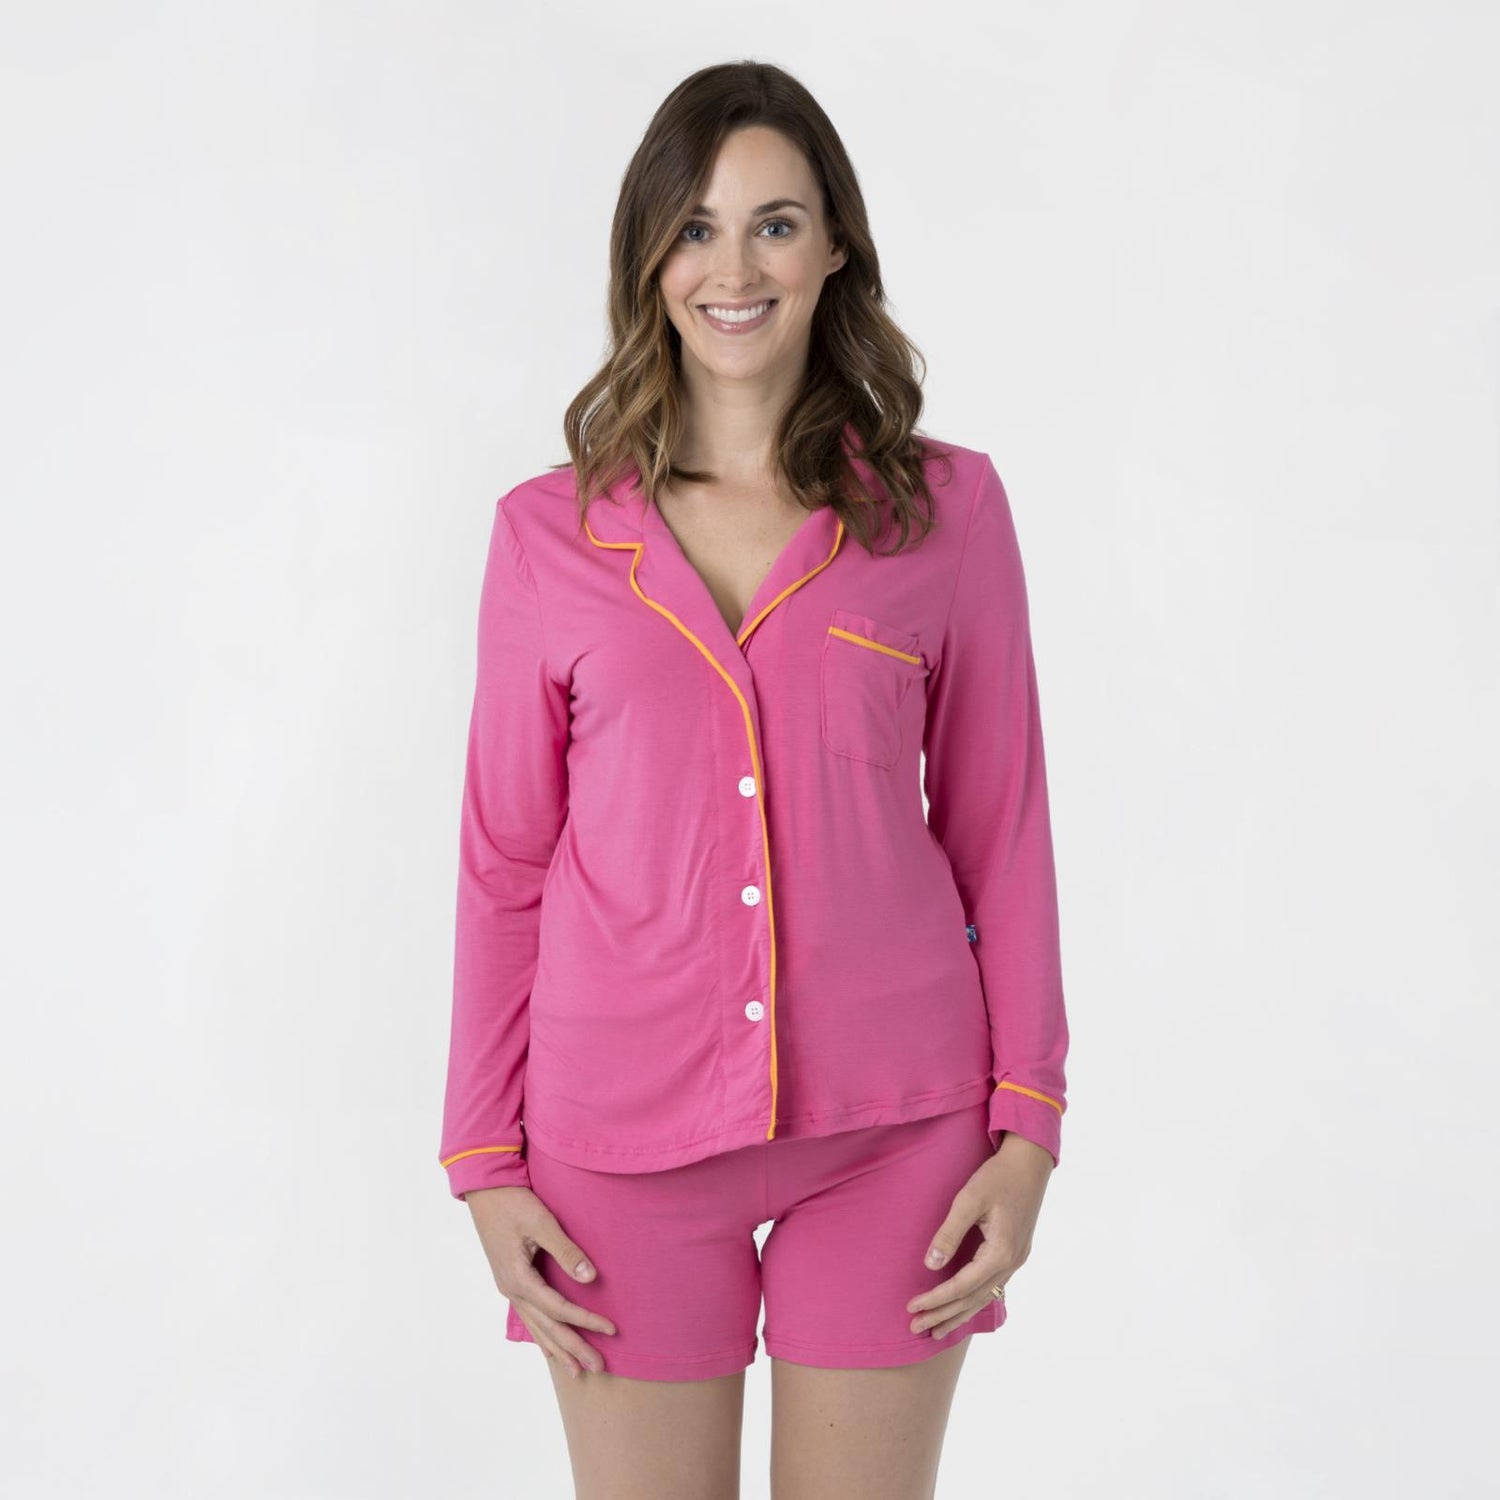 Women's Collared Pajama Set with Shorts in Flamingo with Tamarin Trim